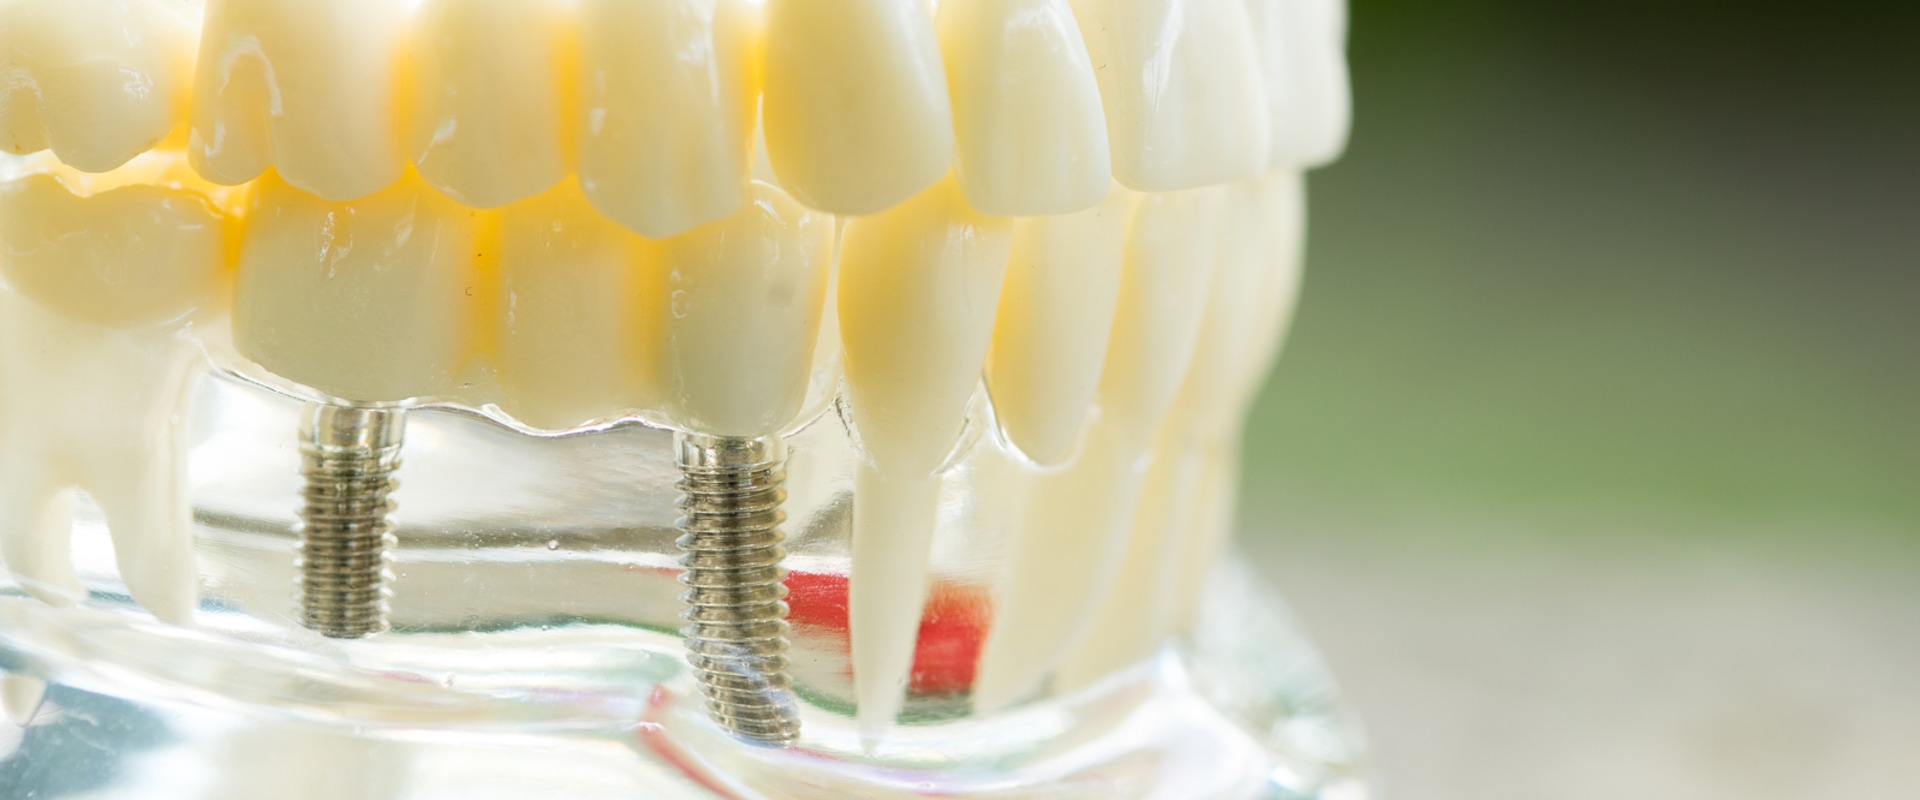 The Process For Getting Dental Implants In McGregor